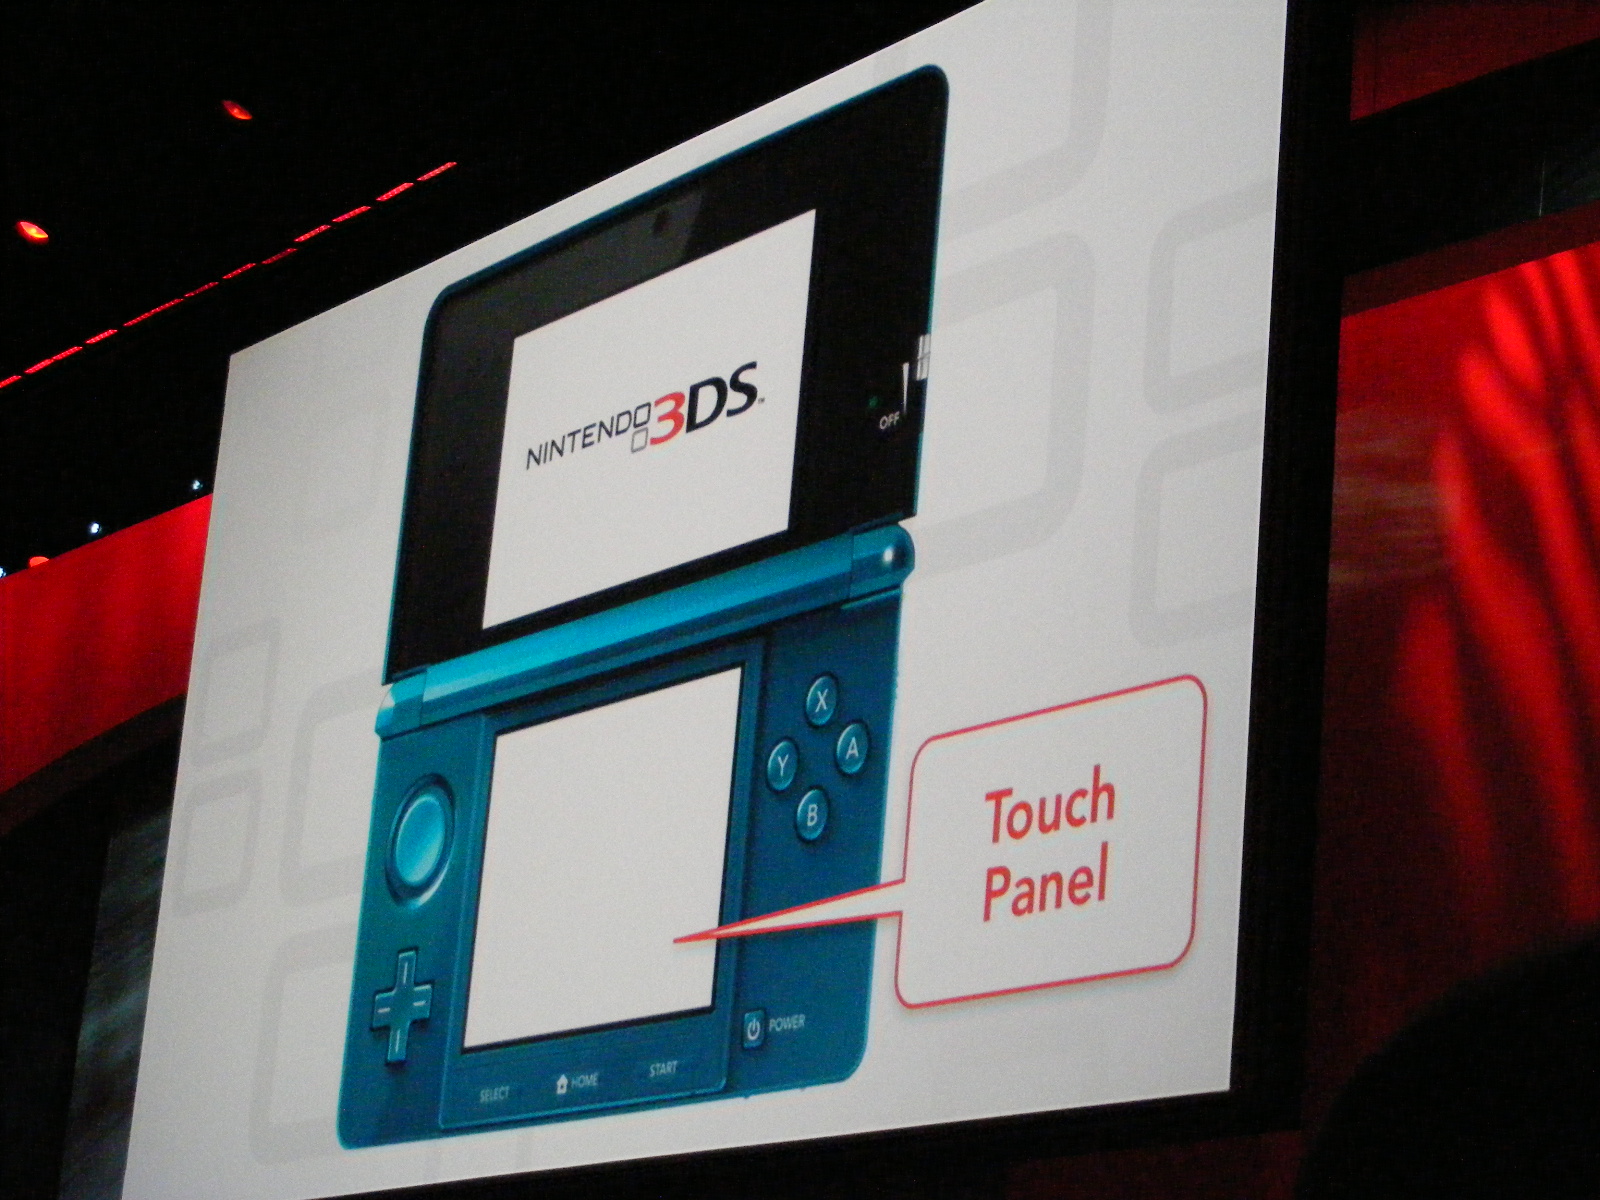 3DS at Nintendo E3 Conference